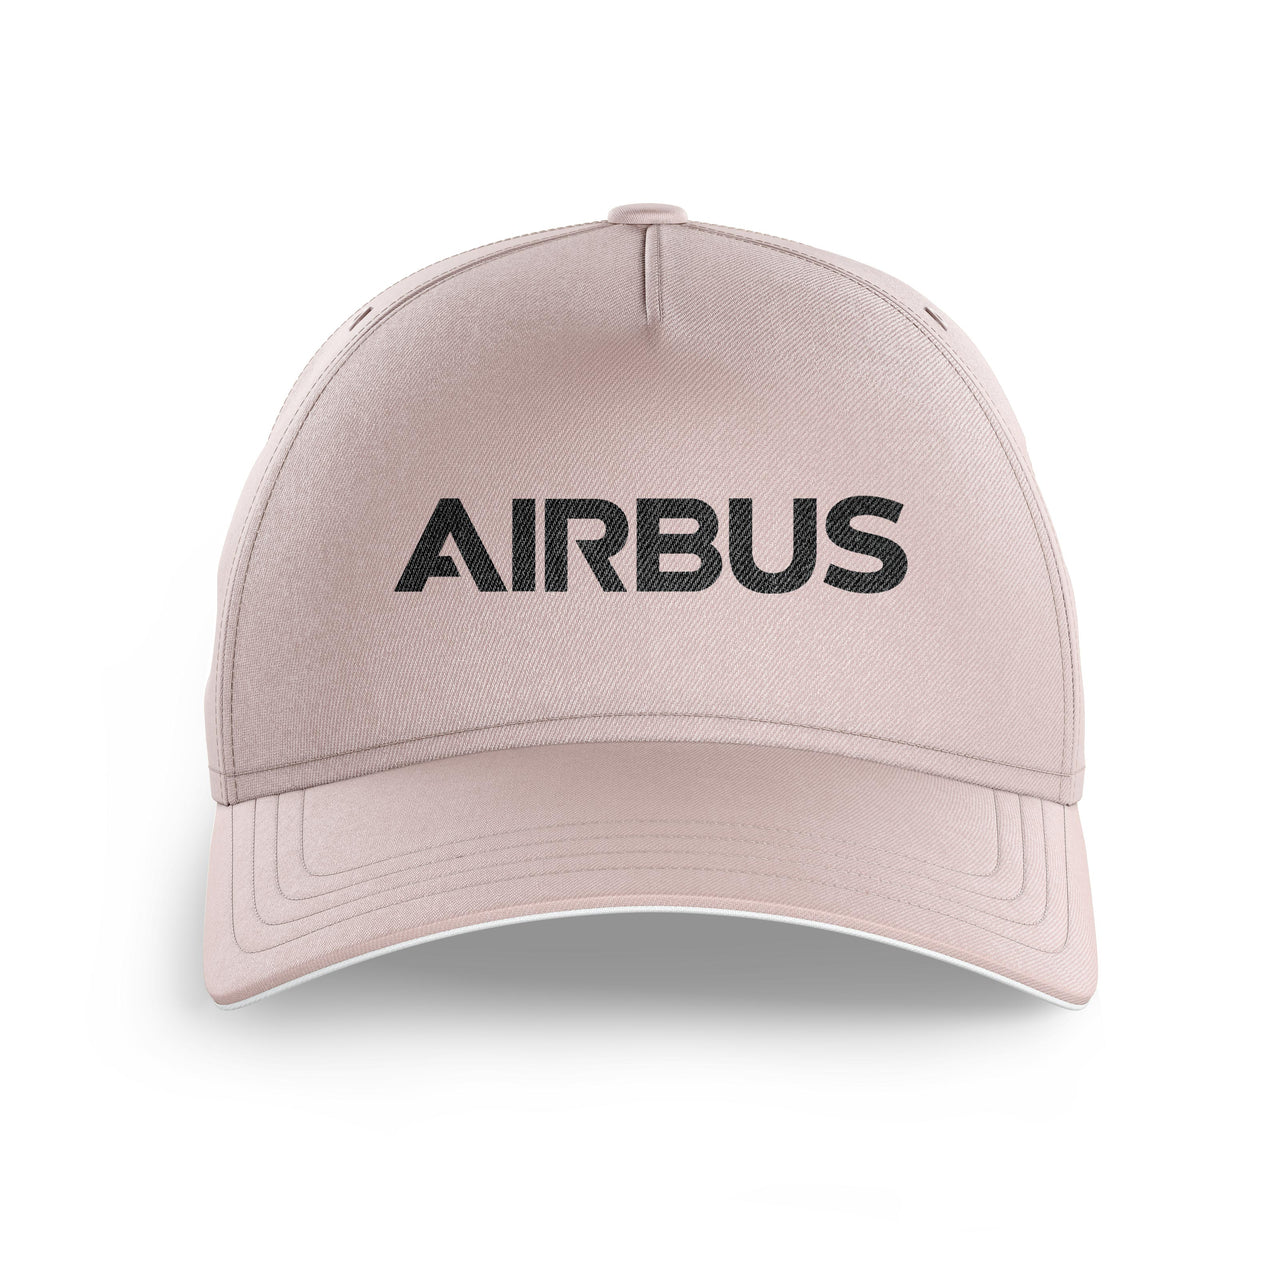 Airbus & Text Printed Hats